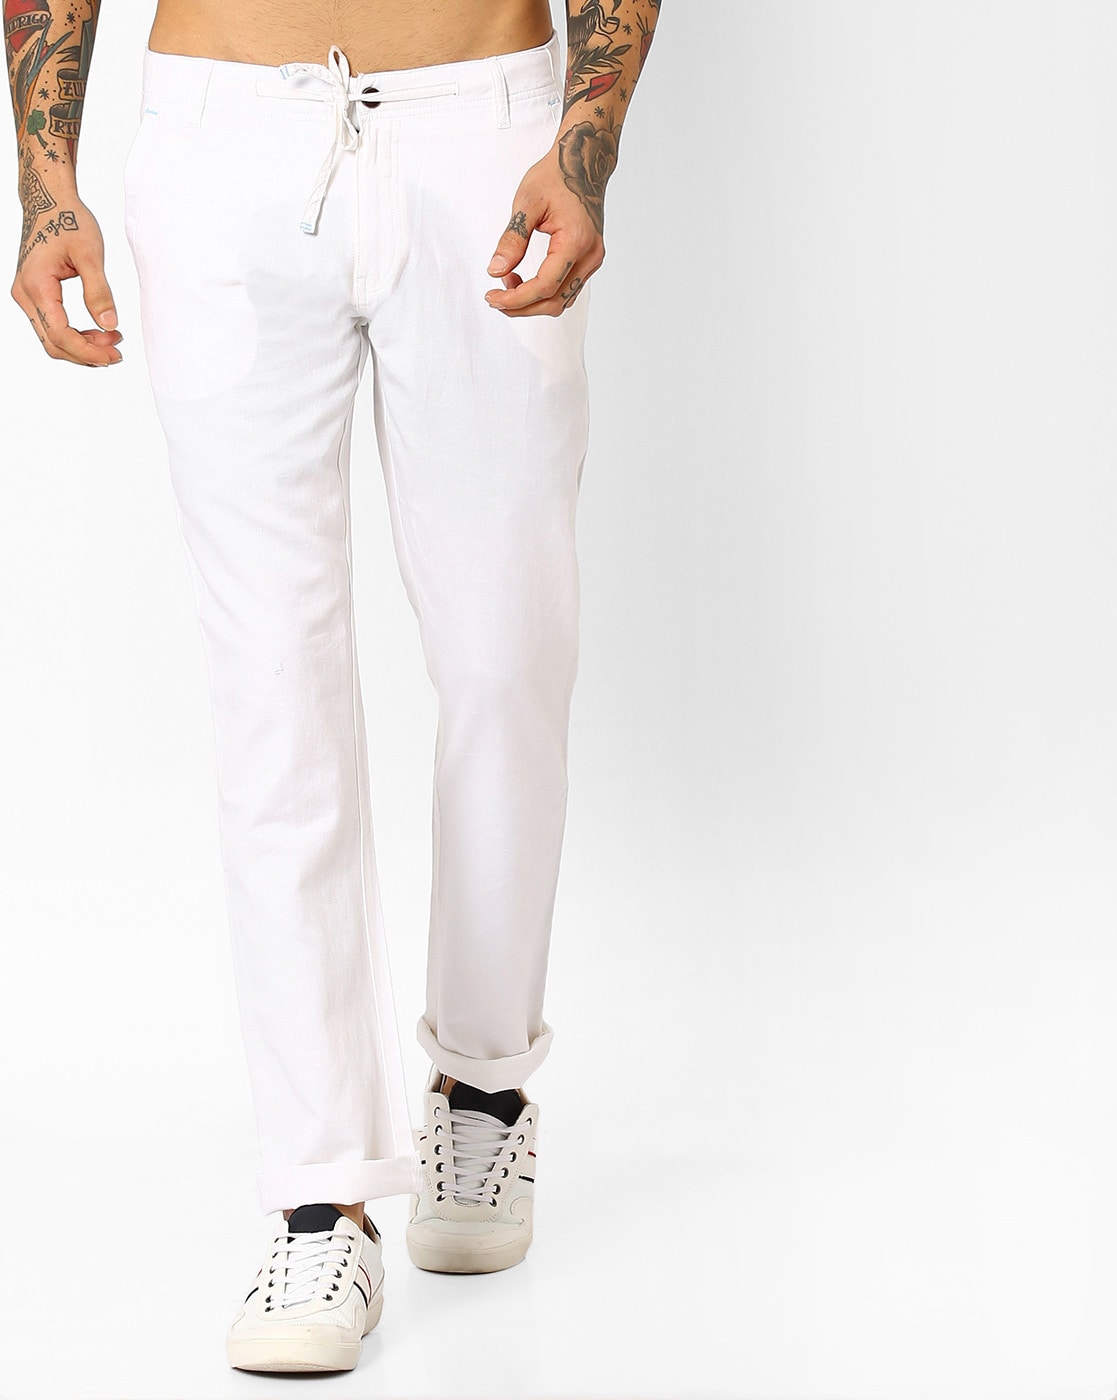 White Shoes with White Pants Outfits For Men In Their 30s 439 ideas   outfits  Lookastic